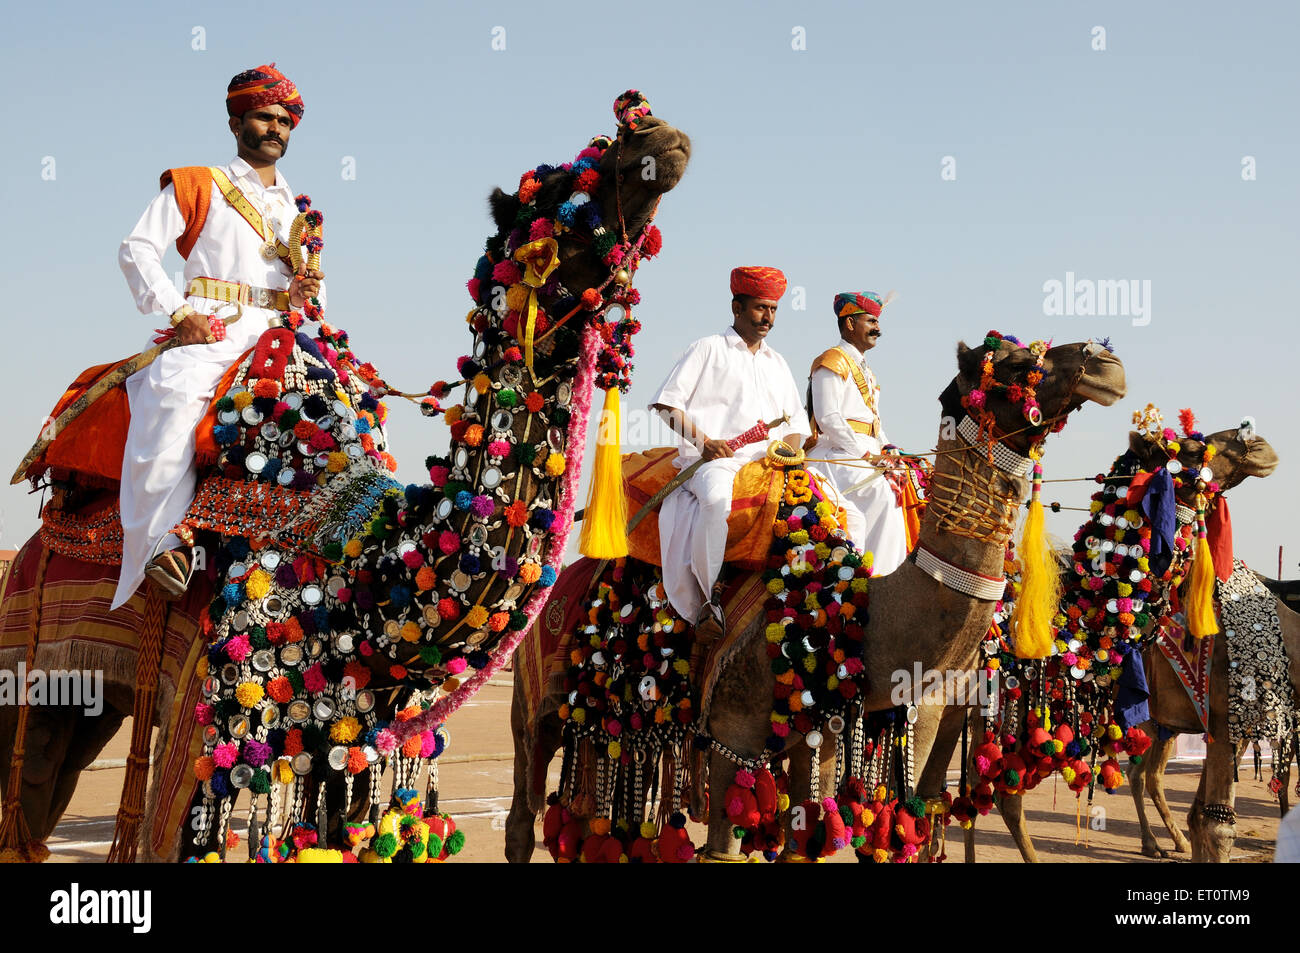 People sitting on camels ; Rajasthan ; India Mr#786 Stock Photo